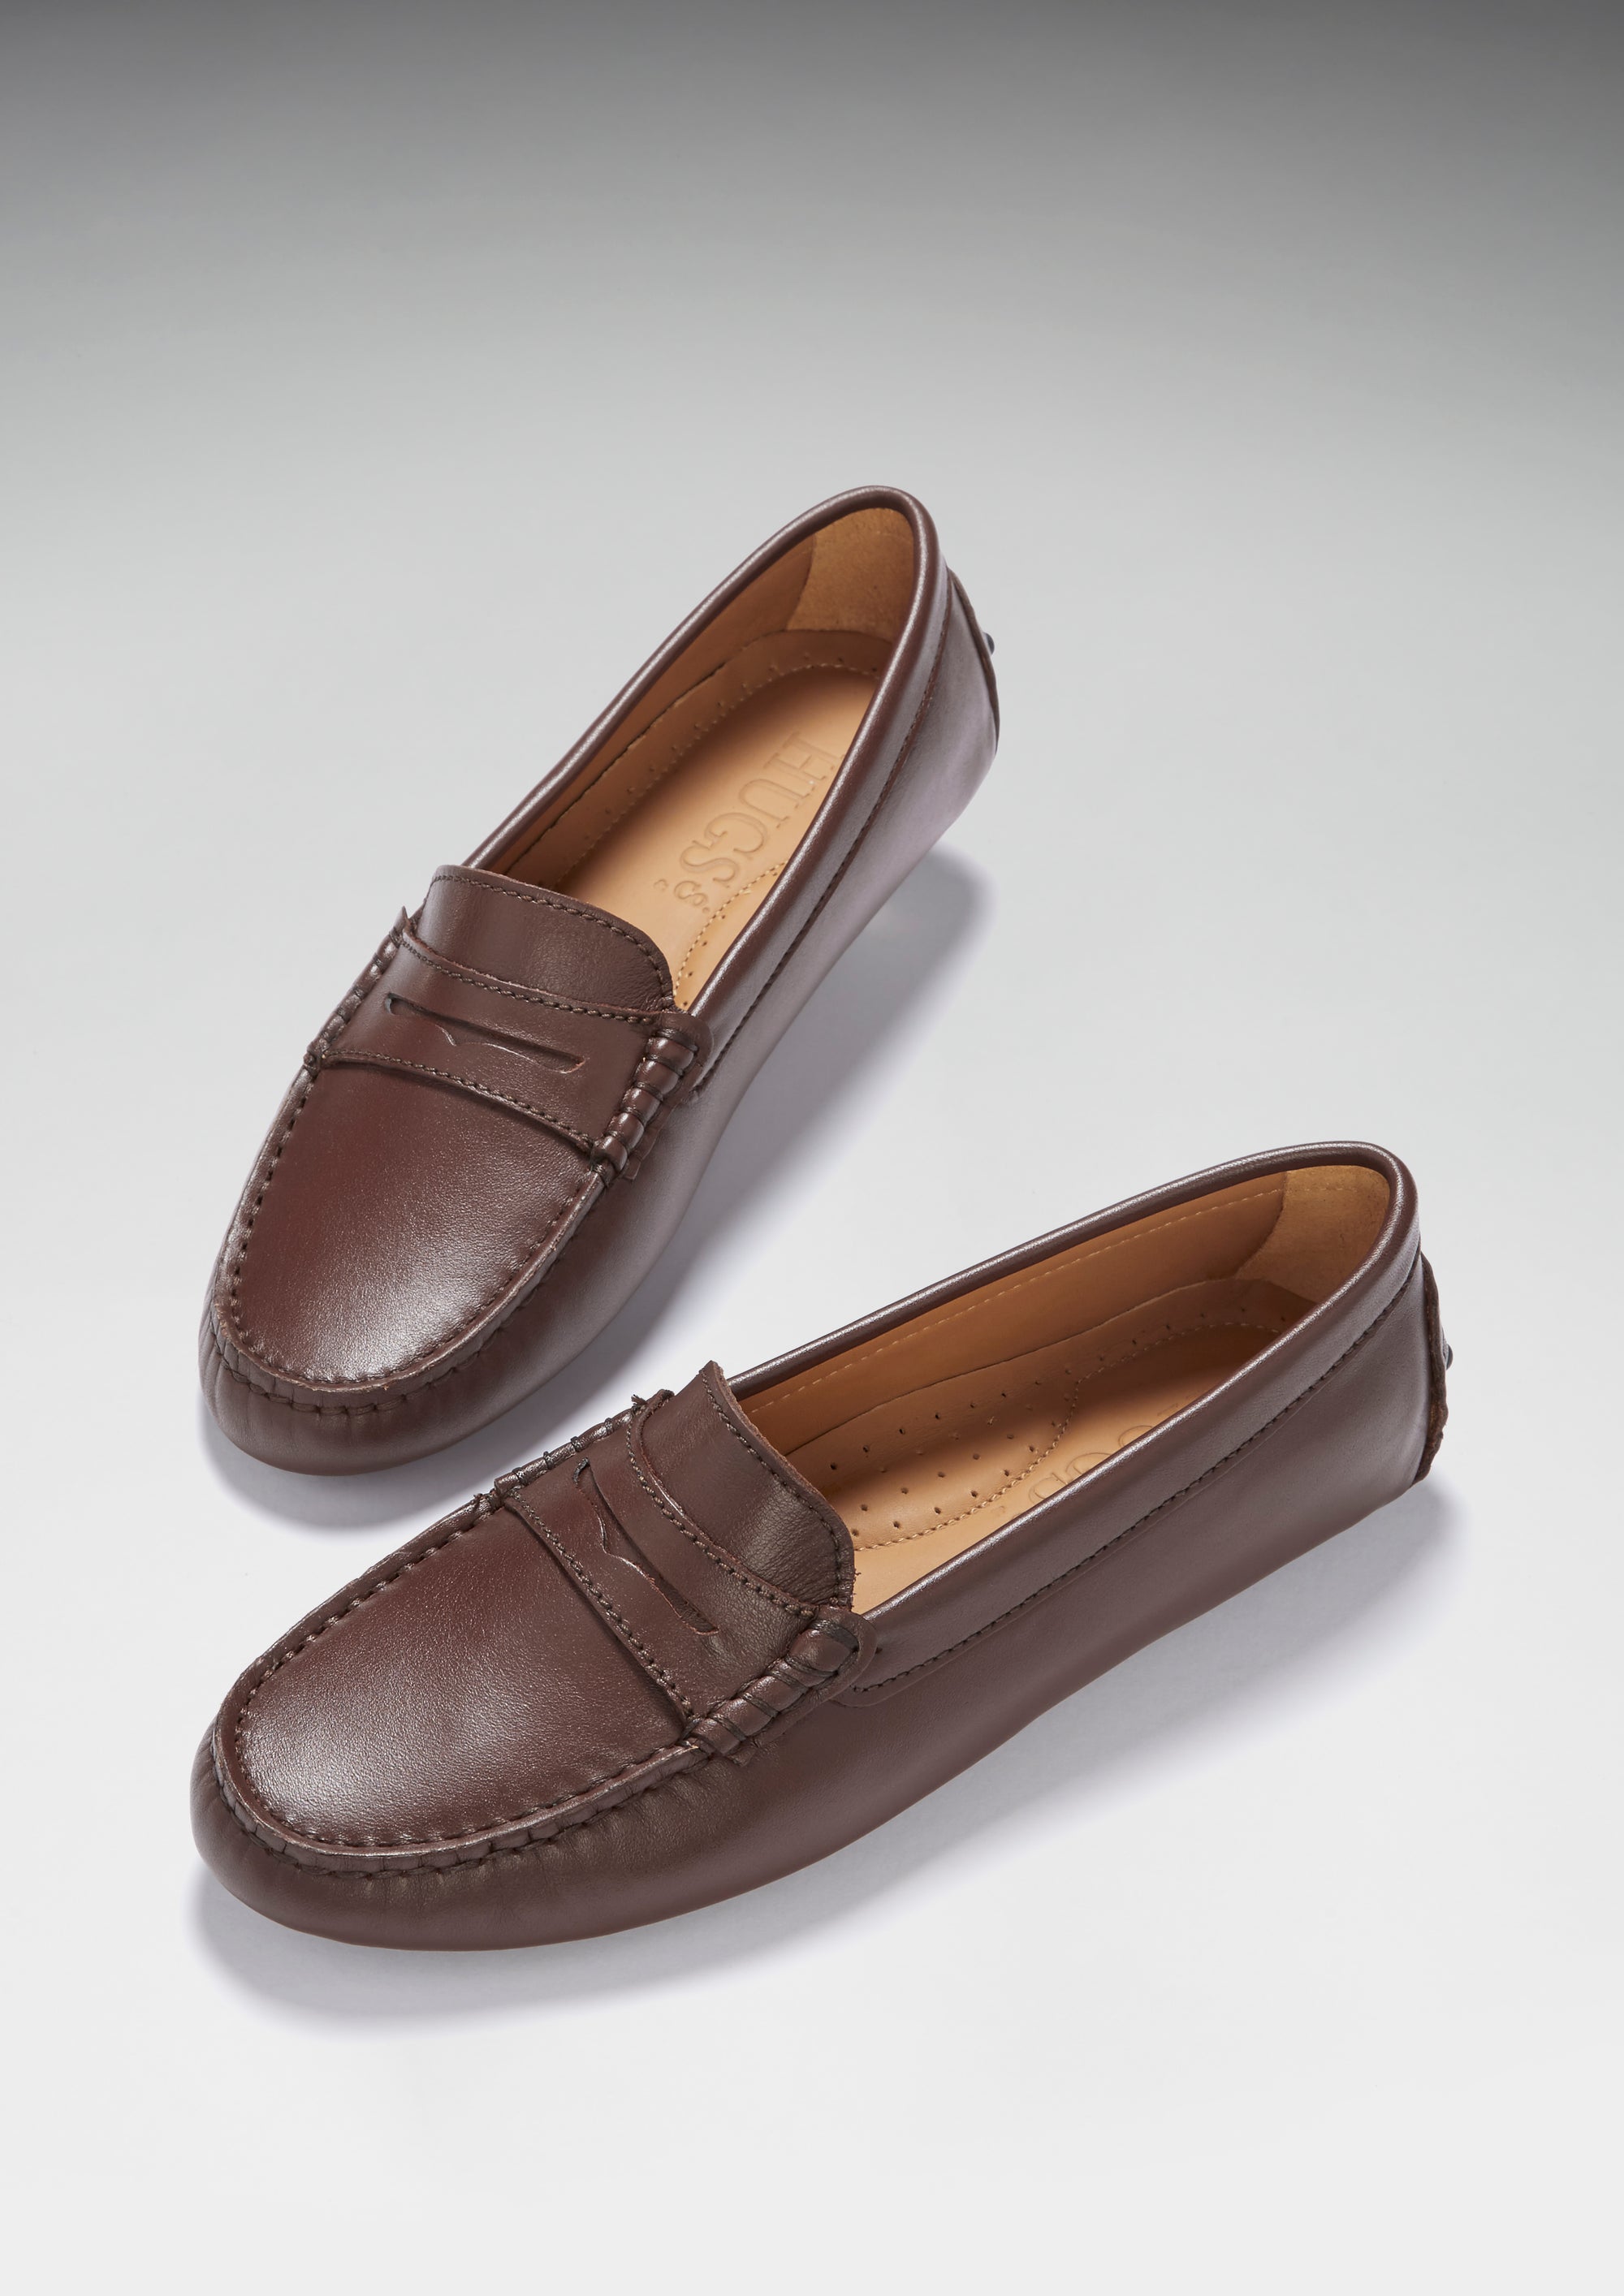 Women's Penny Driving Loafers, brown leather